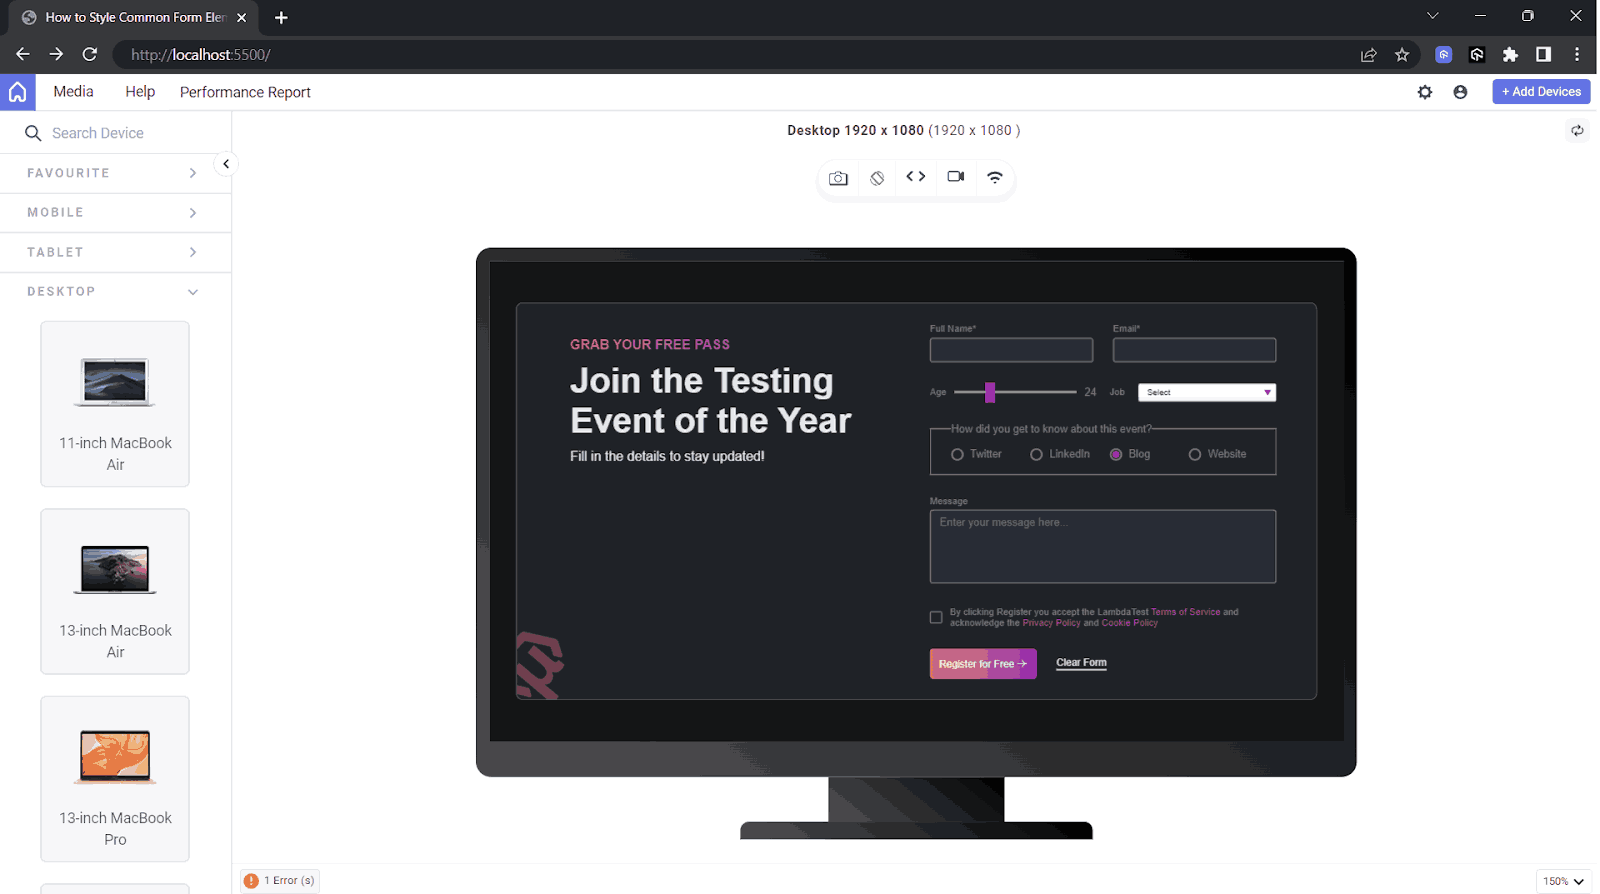 Responsive Testing of CSS Form Design Elements Screen Size (1920x1080)